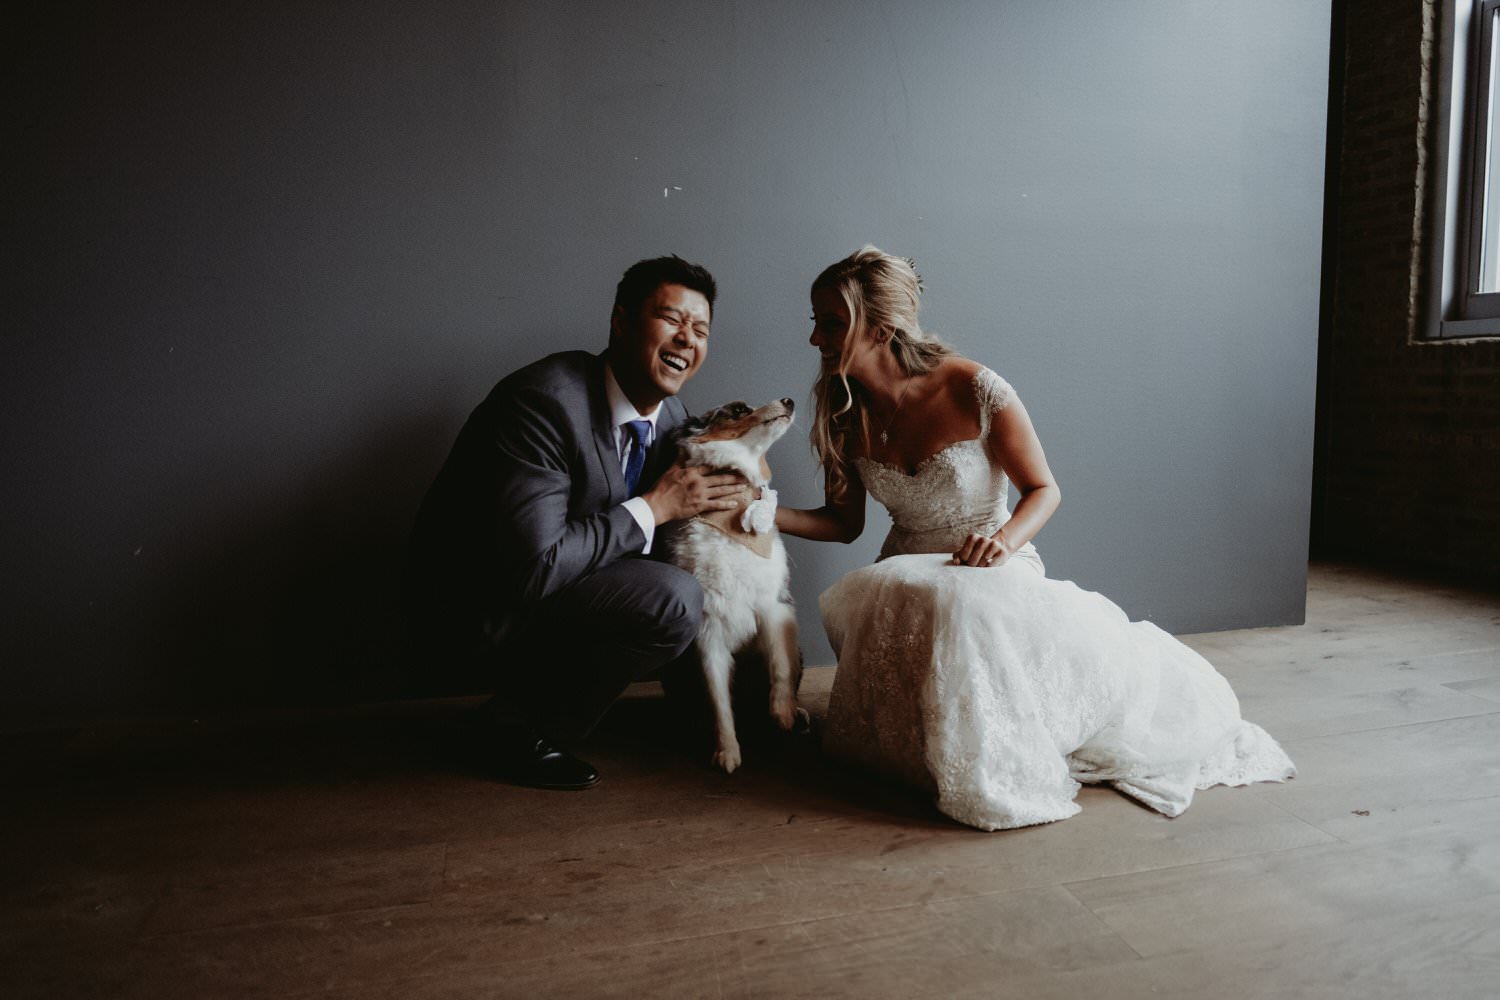 architectural artifacts Chicago wedding photography. Bride and groom with cute dog.